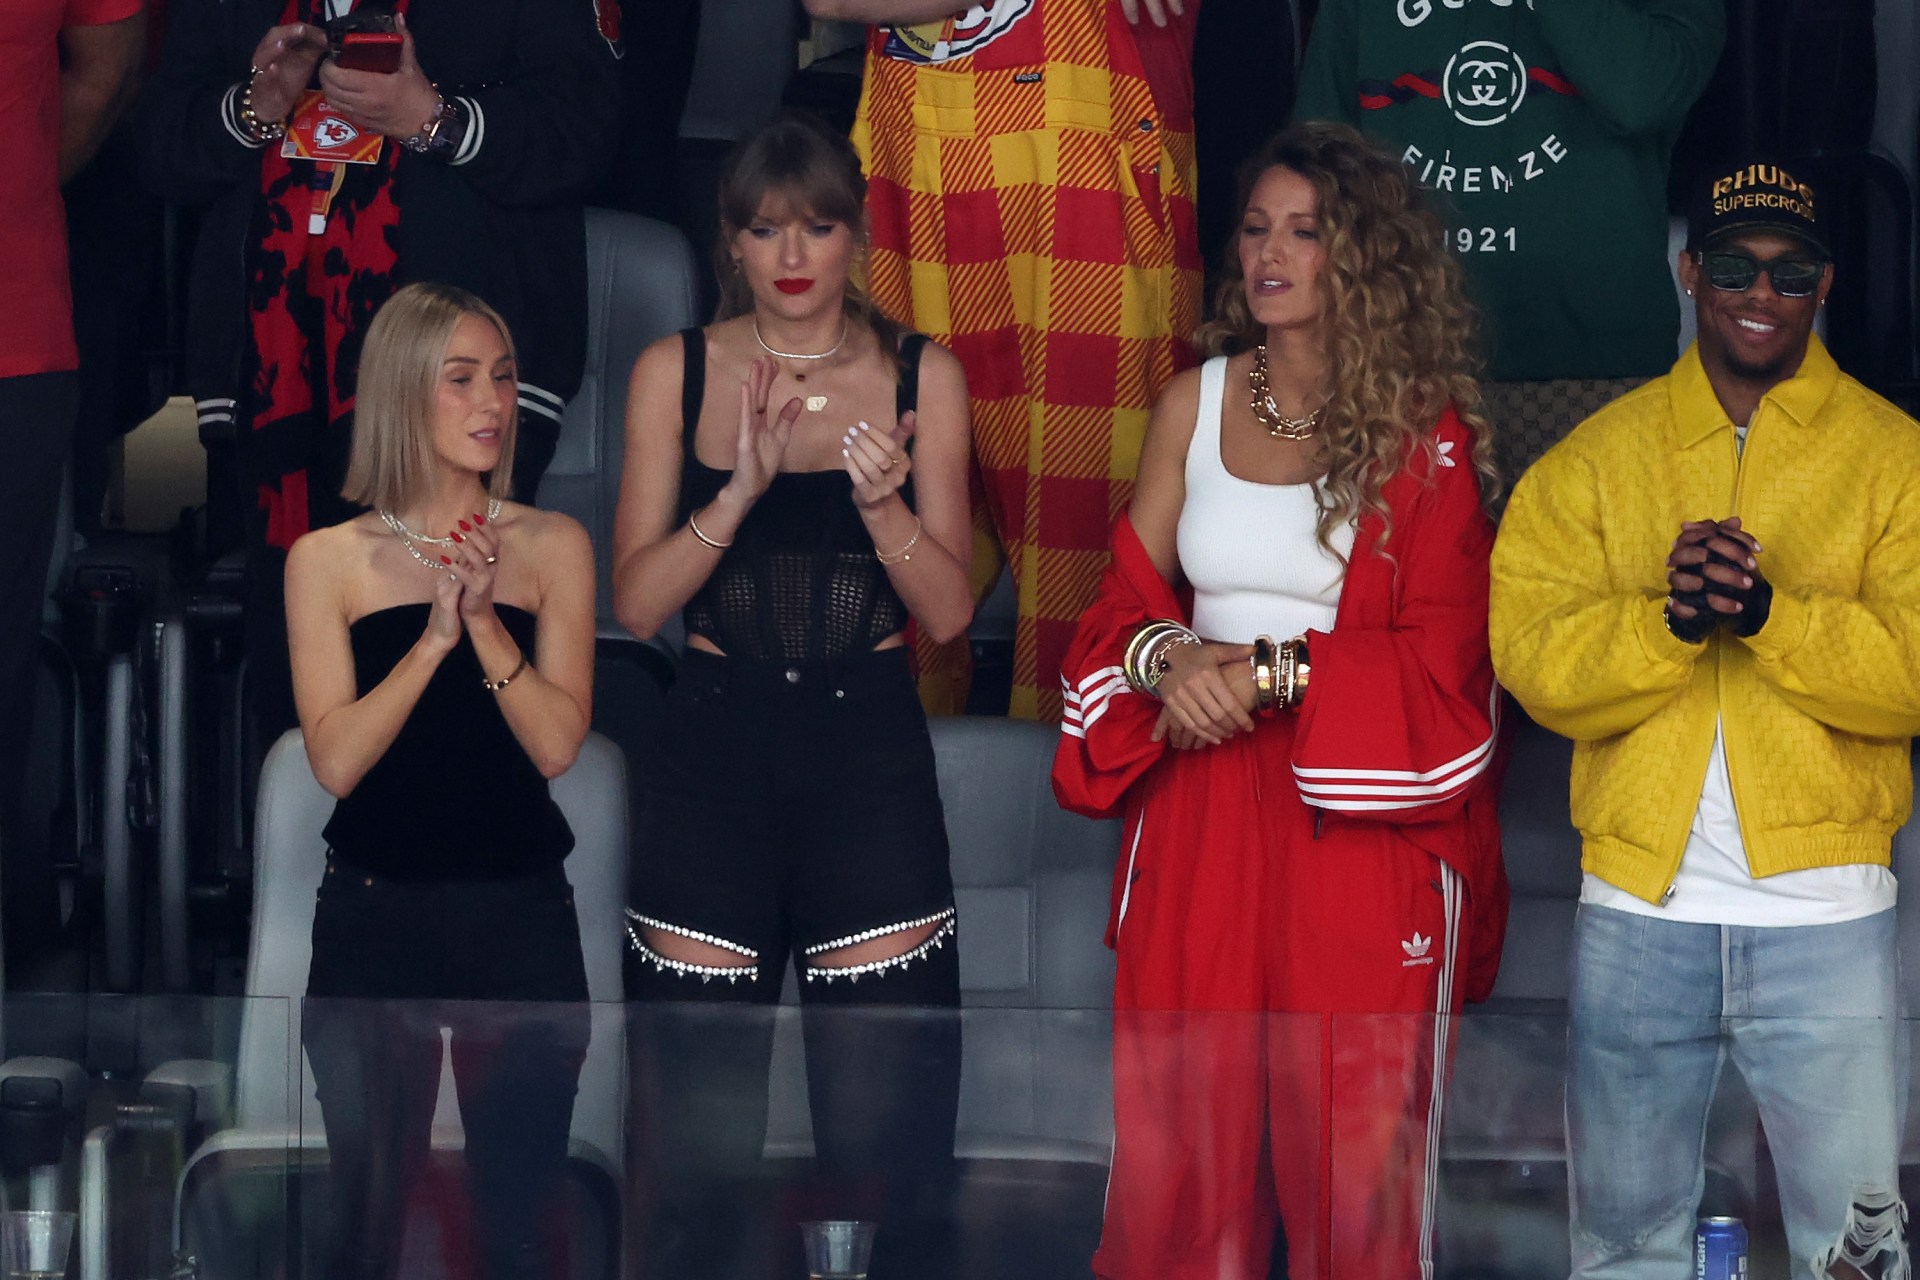 Taylor Swift's Super Bowl Pants Dupes To Buy ASAP